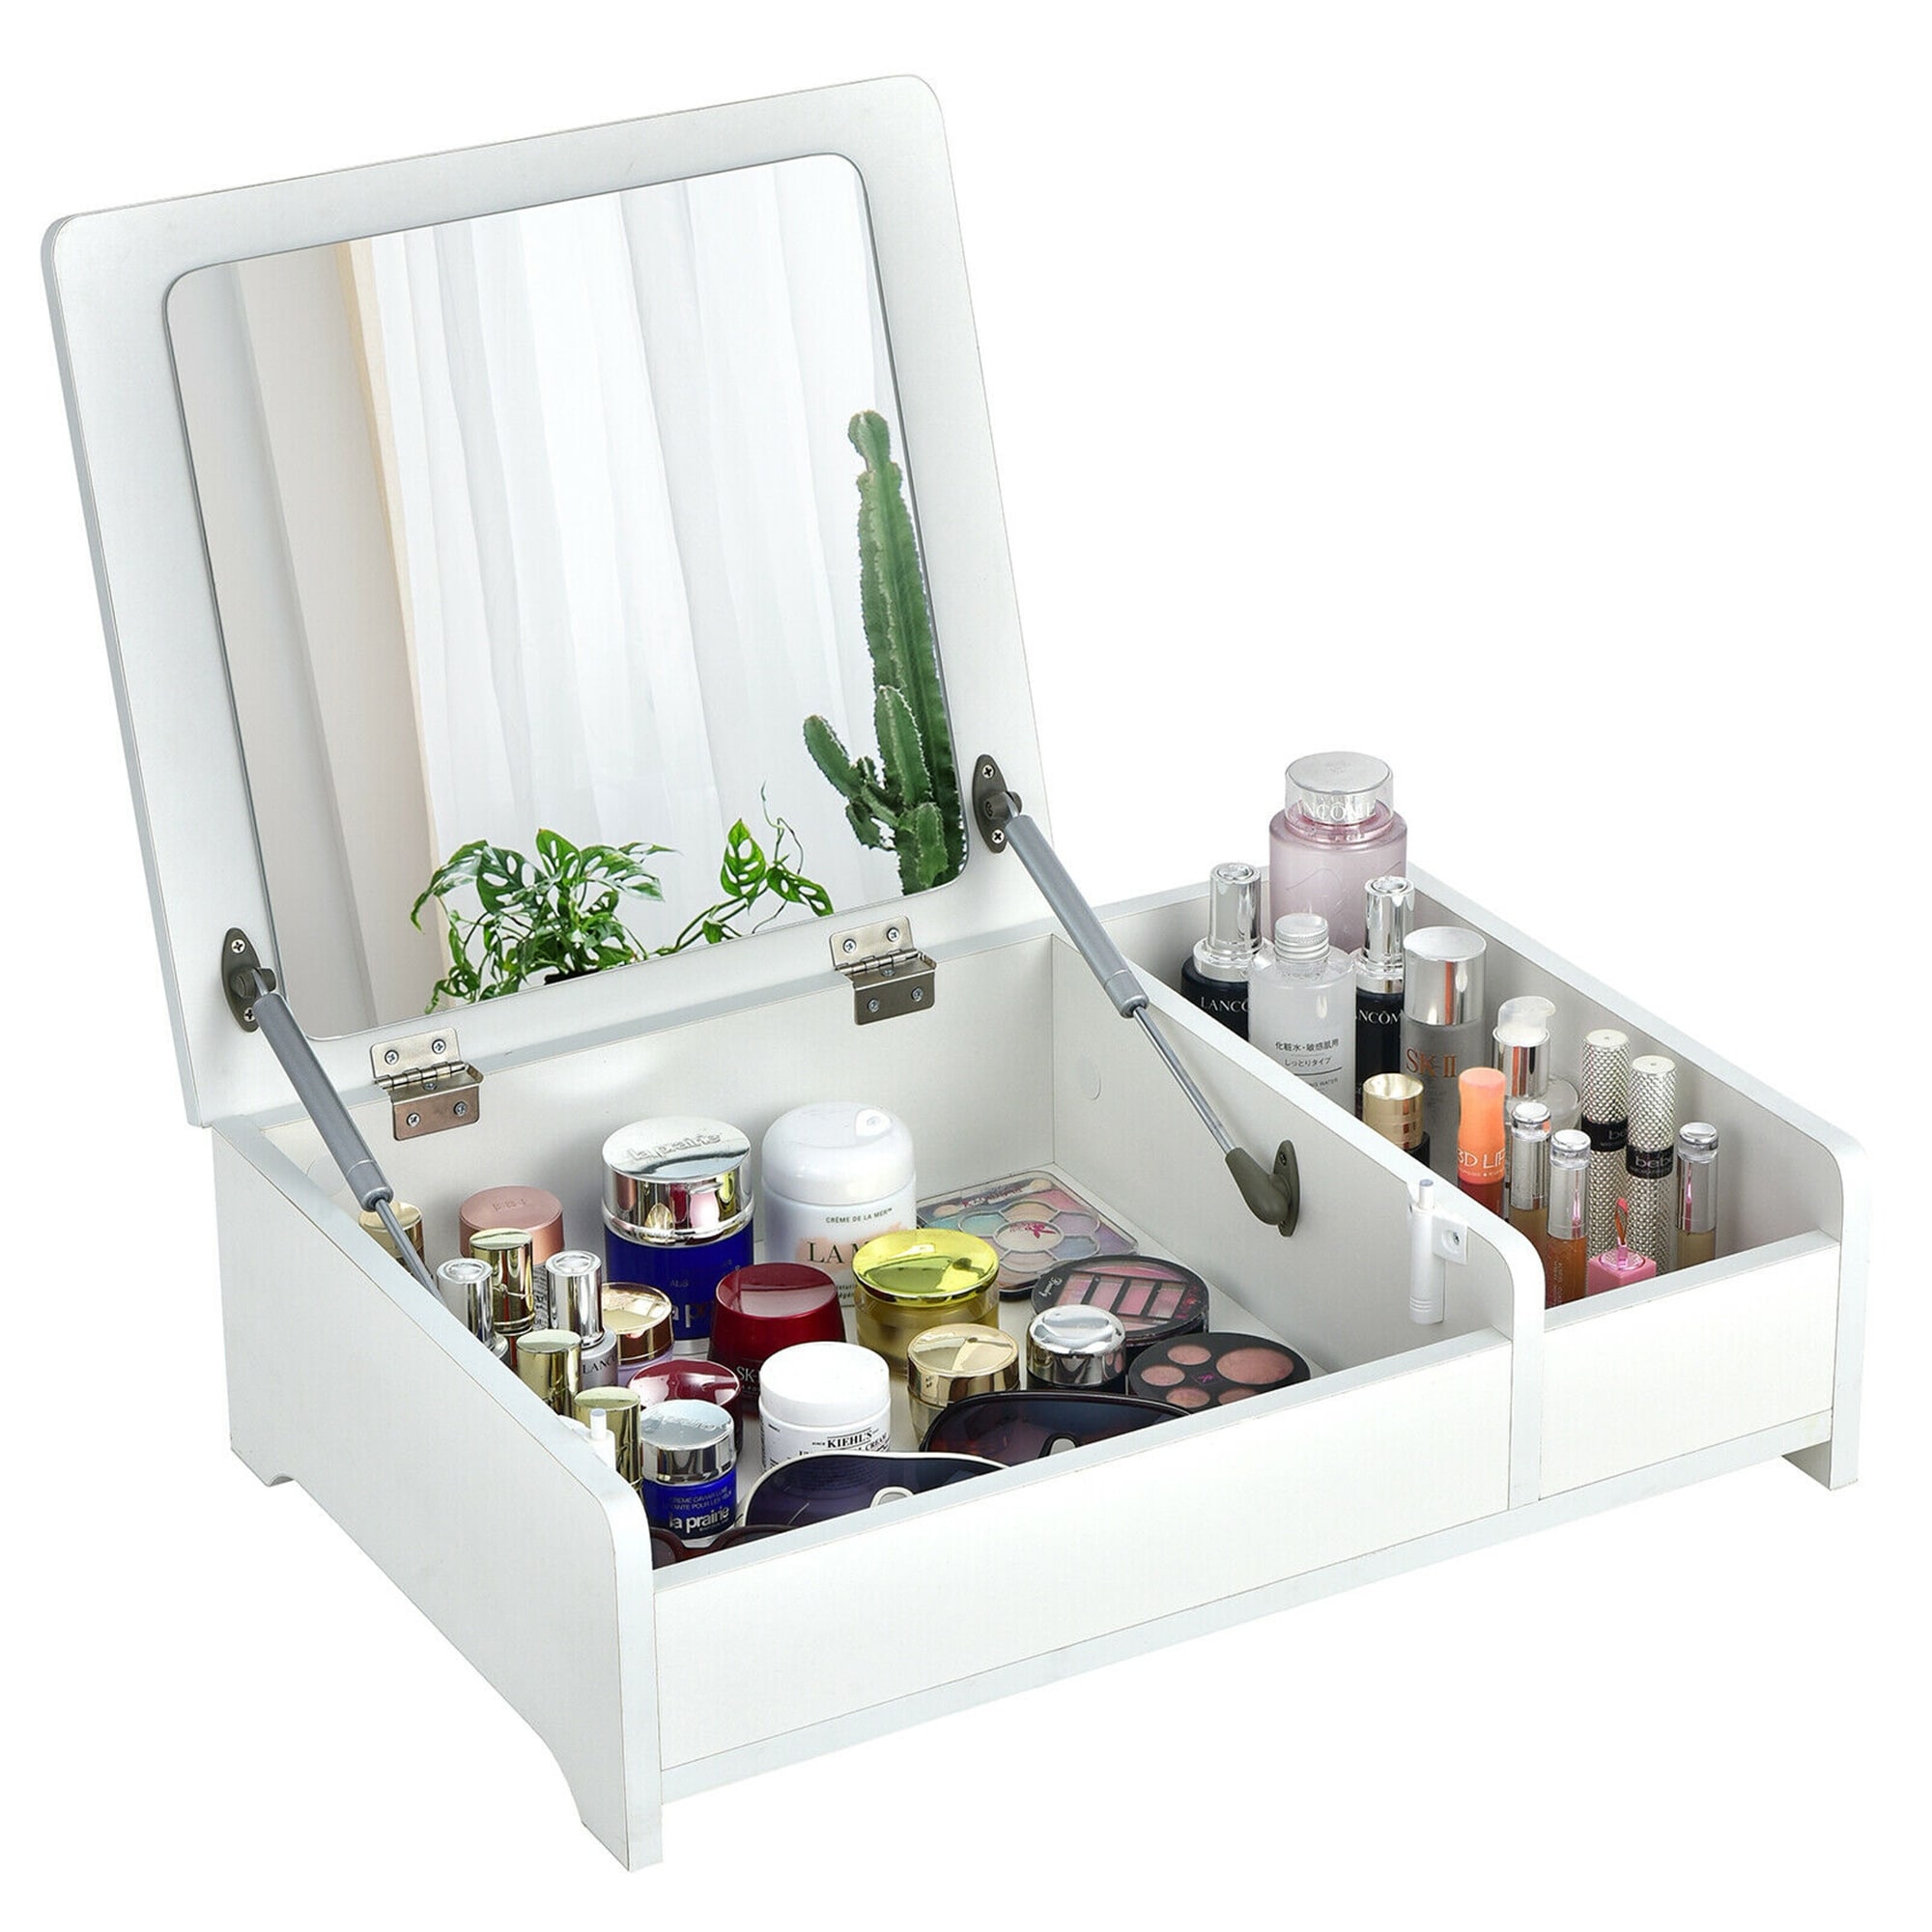 https://ak1.ostkcdn.com/images/products/is/images/direct/7ec16b66923ea7d3e81fd4d59ae407e8973cecbe/Gymax-2-in-1-Vanity-Dresser-w--Flip-Top-Mirror-Tabletop-Storage-Box.jpg